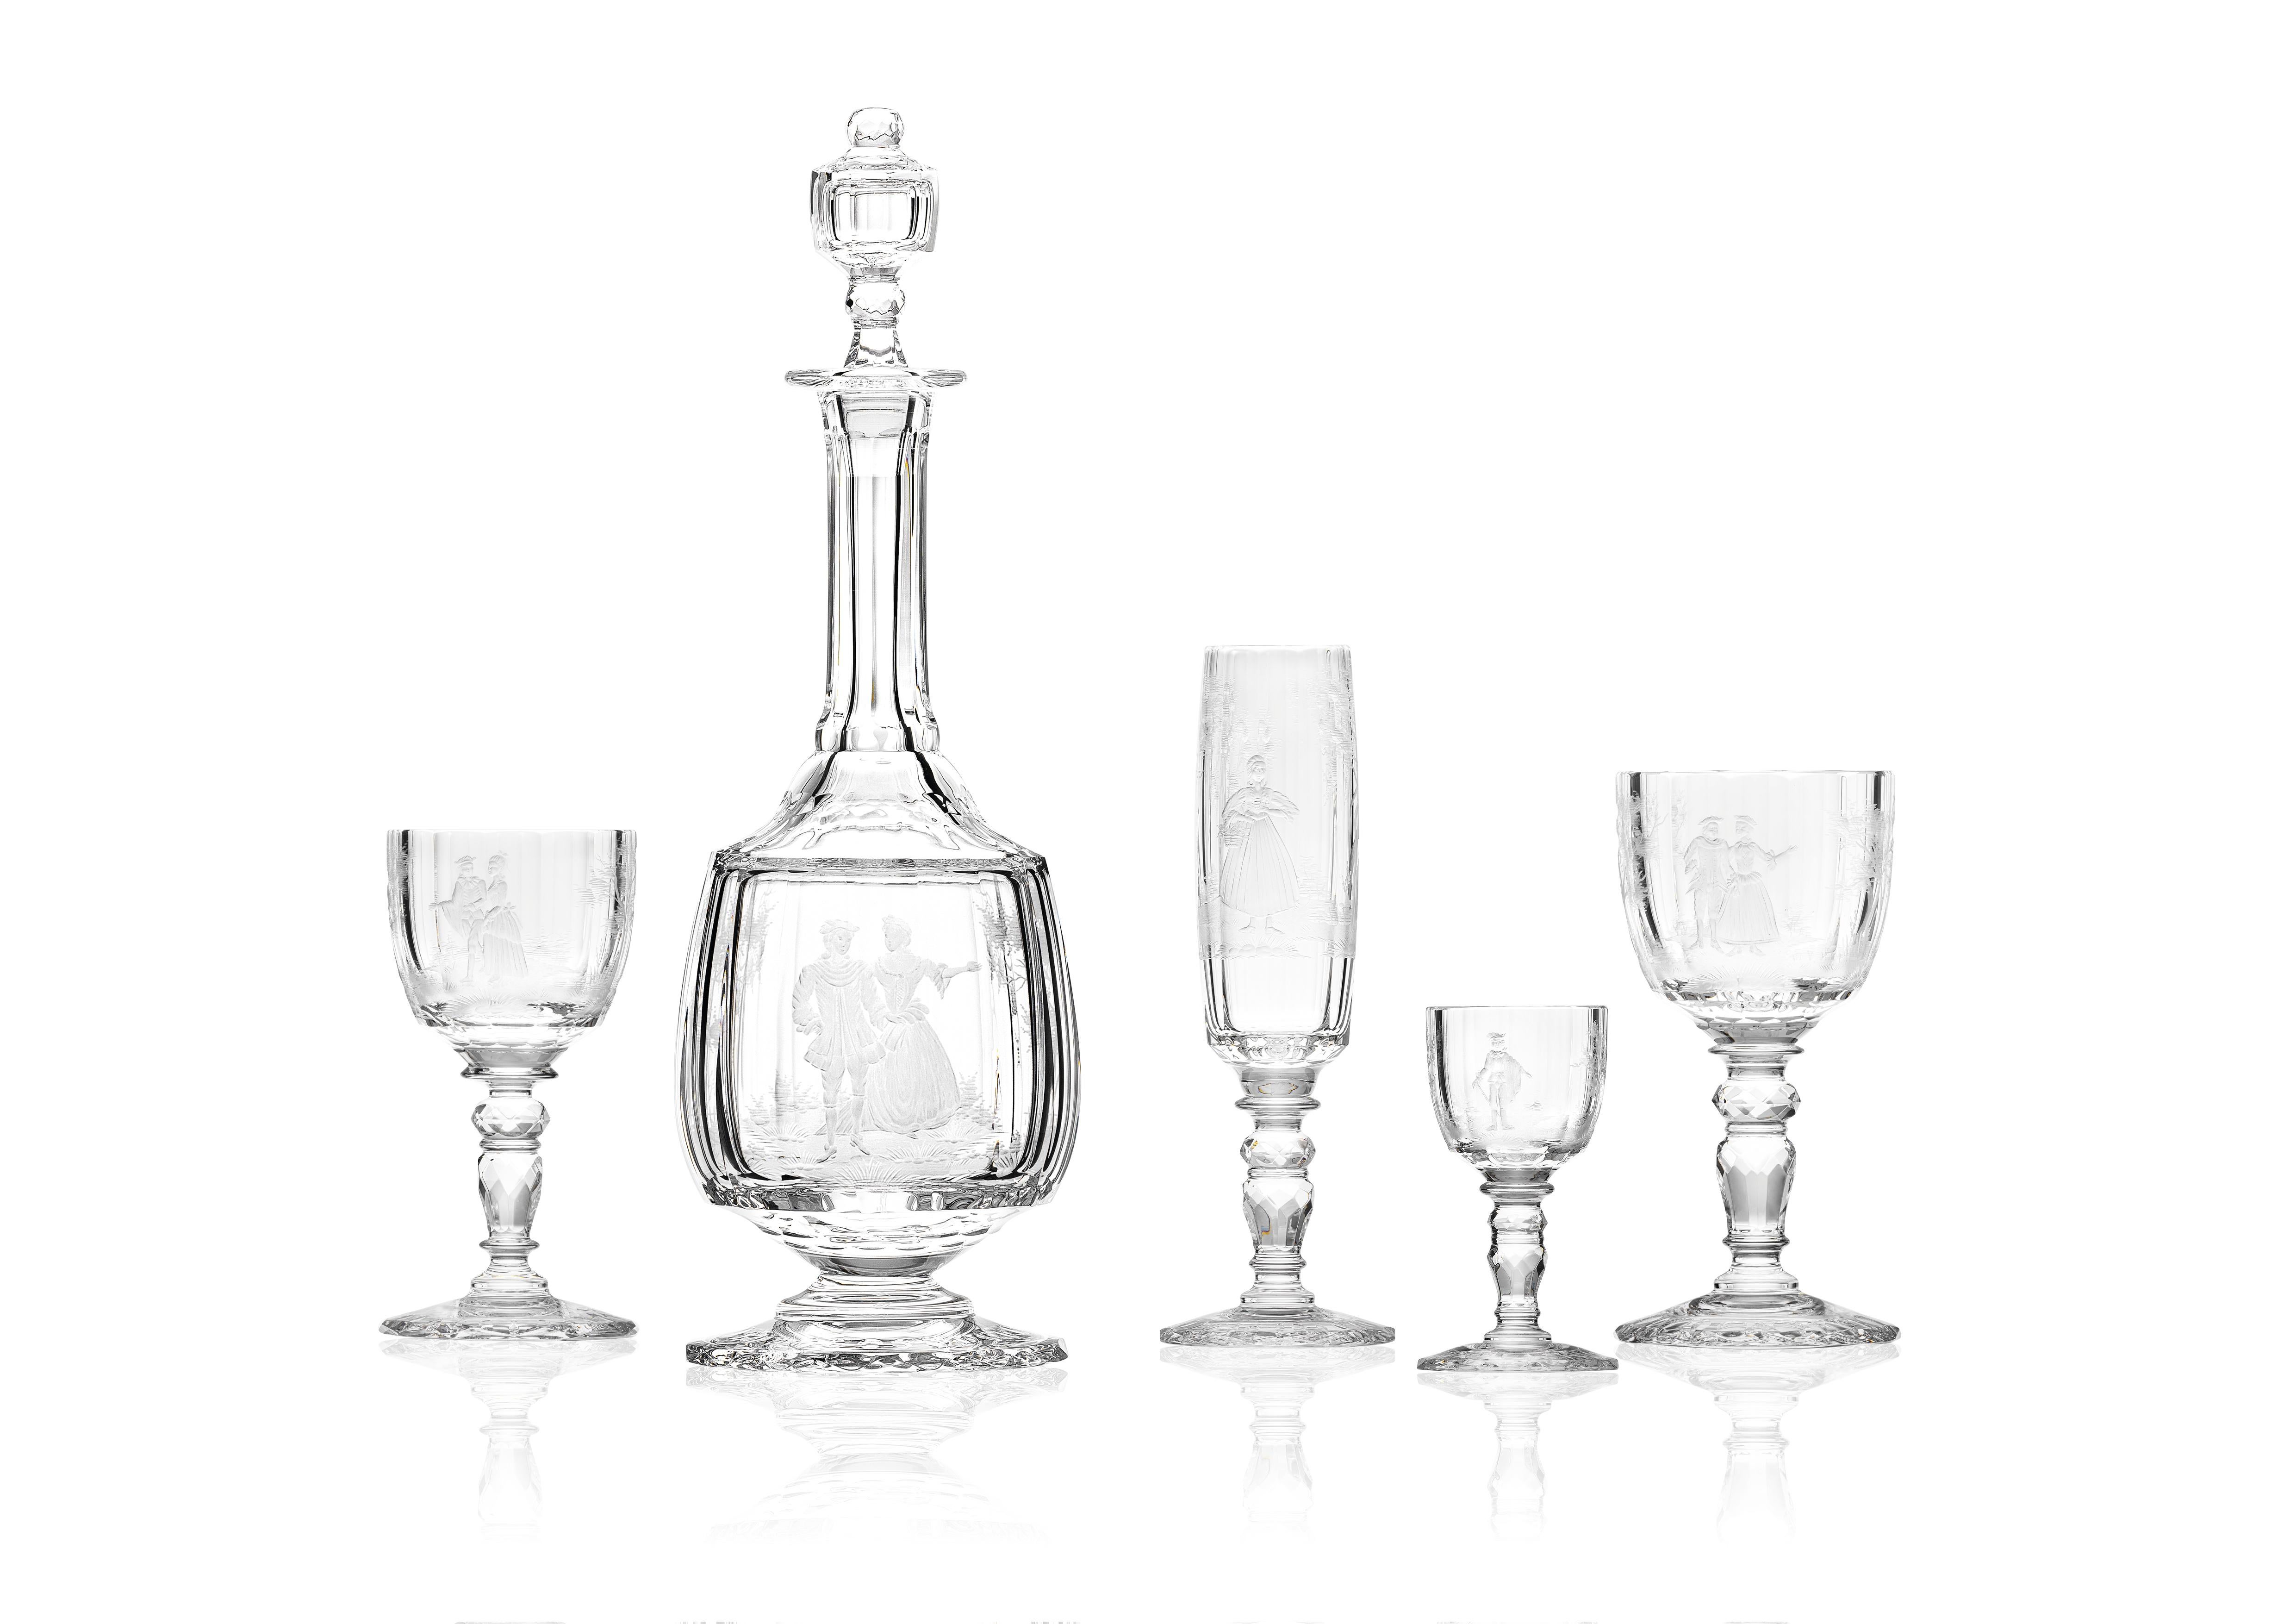 This legendary collection of drinking glasses is inspired by a Baroque table collection that, during the reign of the Austrian empress and Czech queen Maria Theresa, belonged to the Schönbrunn Palace in Vienna. Leo Moser elevated this design, using